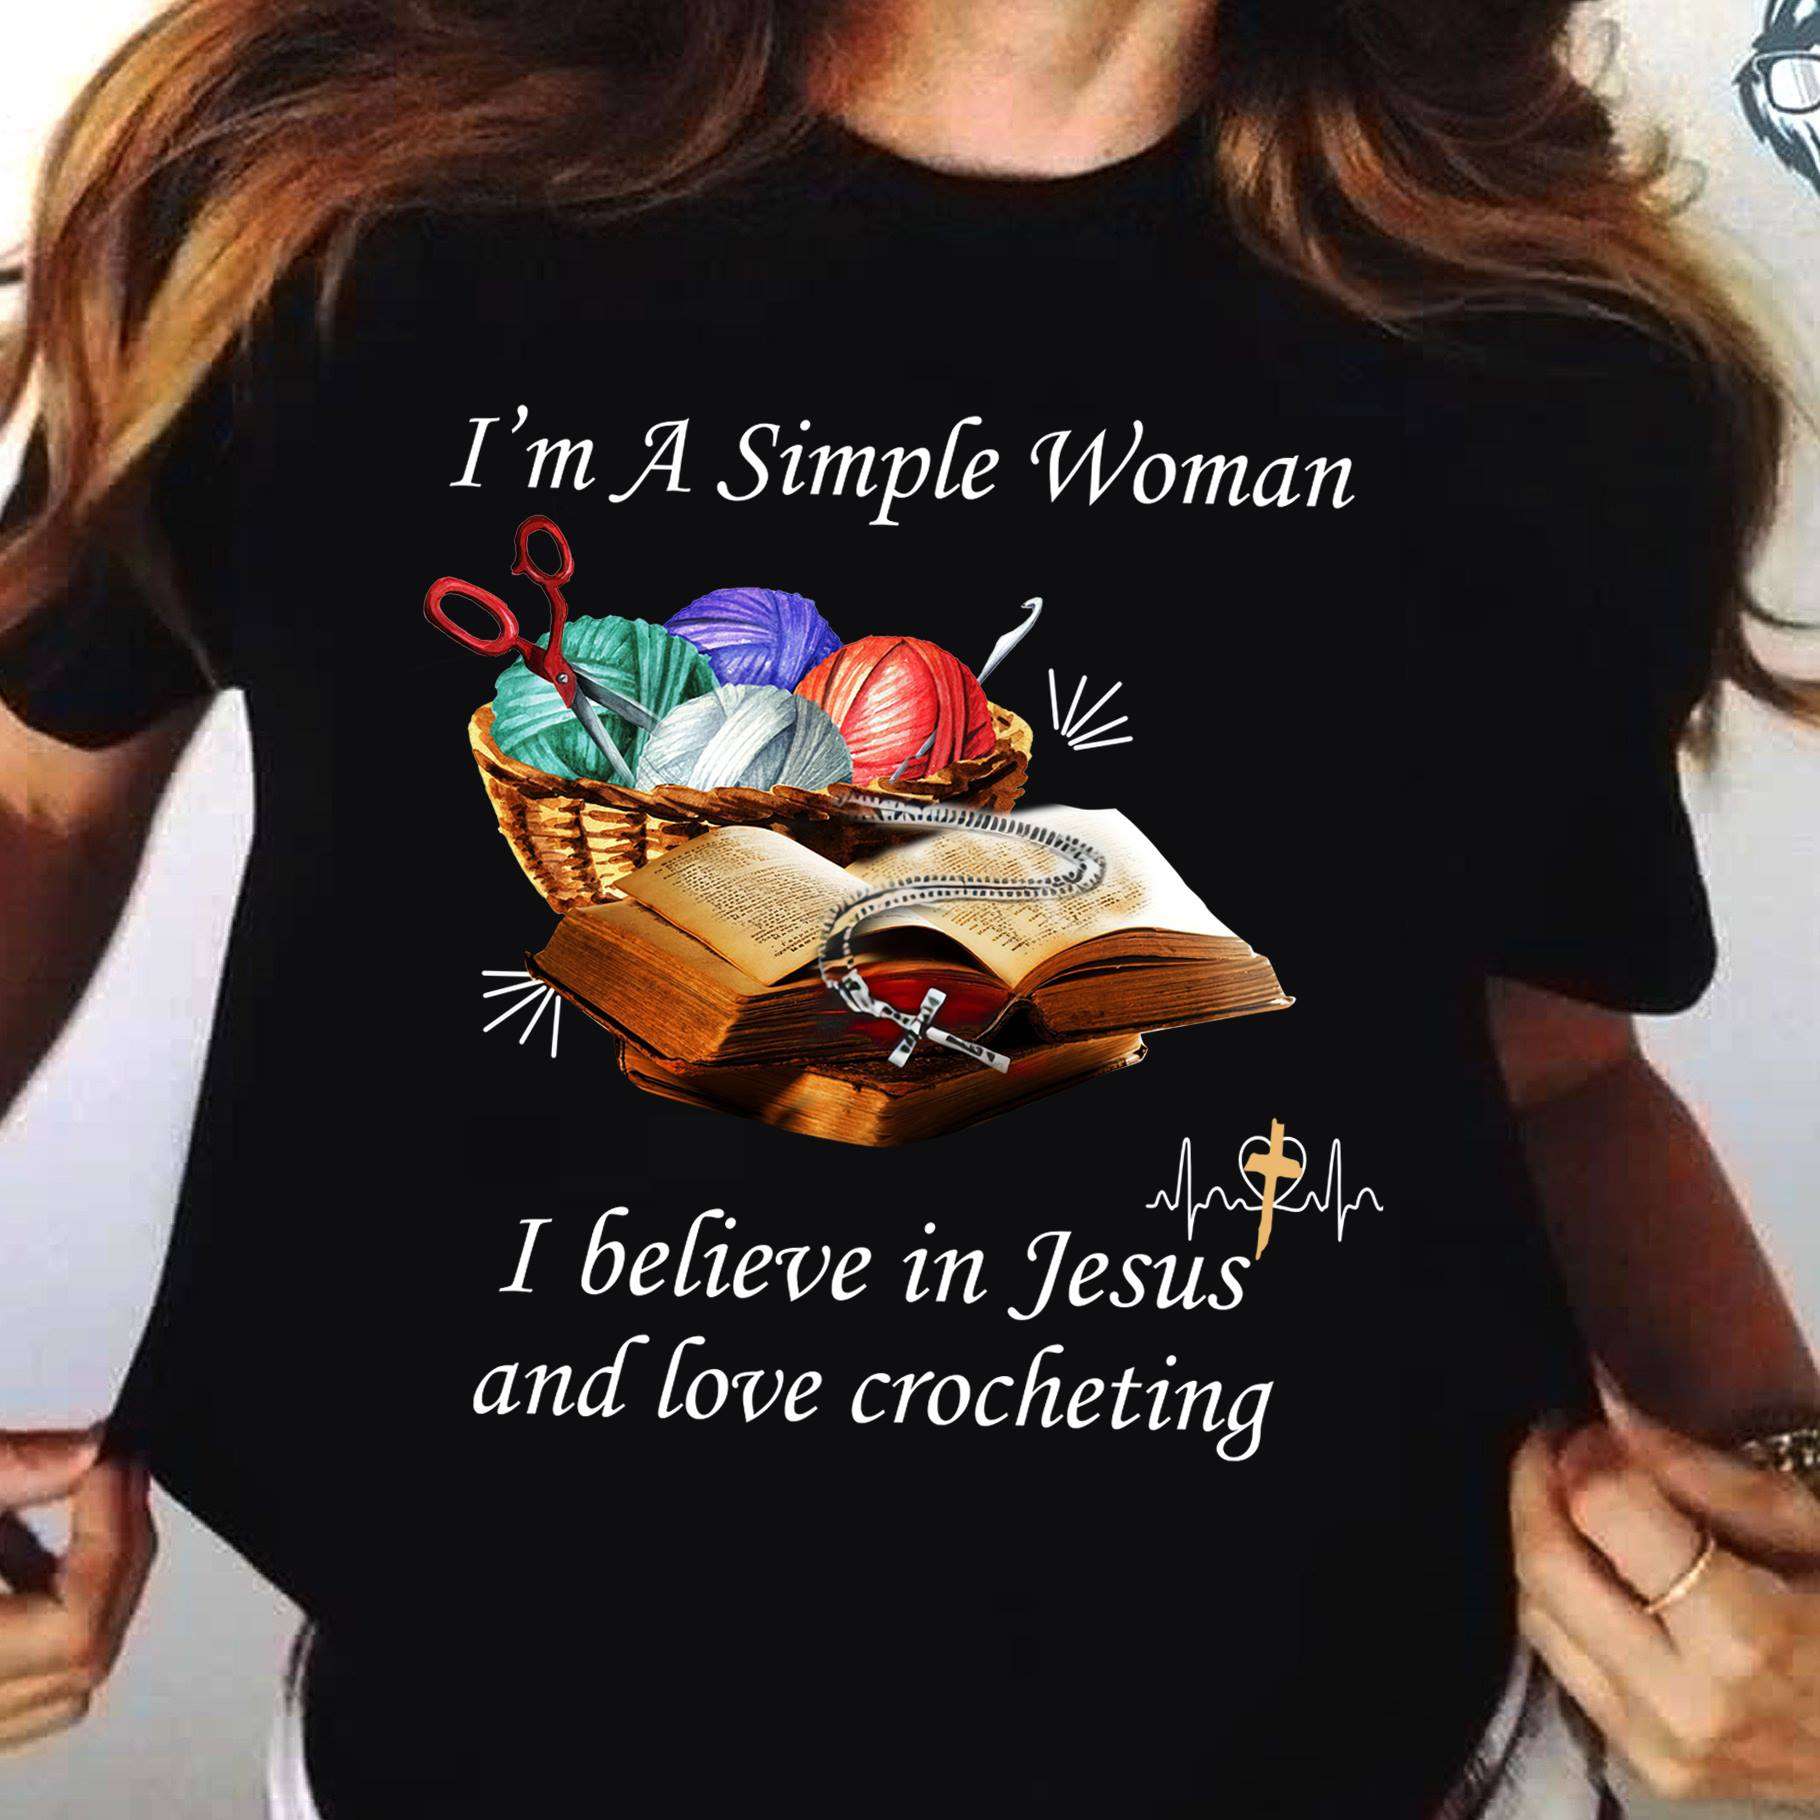 I'm a simple woman, I believe in Jesus and love crocheting - Crocheting the hobby, the holy bible